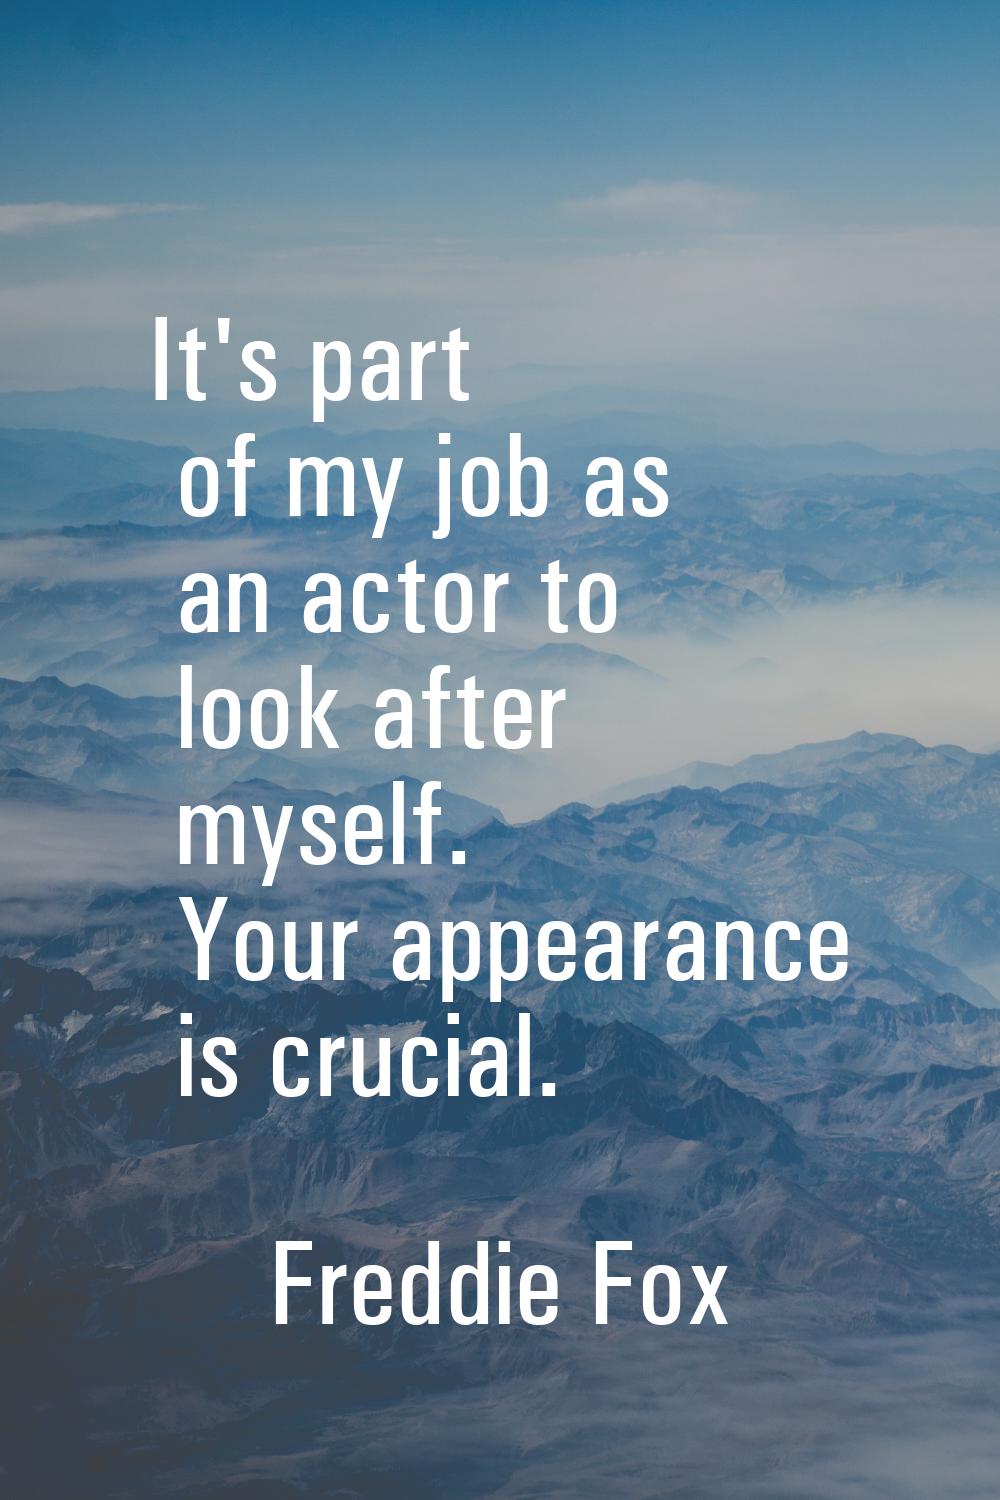 It's part of my job as an actor to look after myself. Your appearance is crucial.